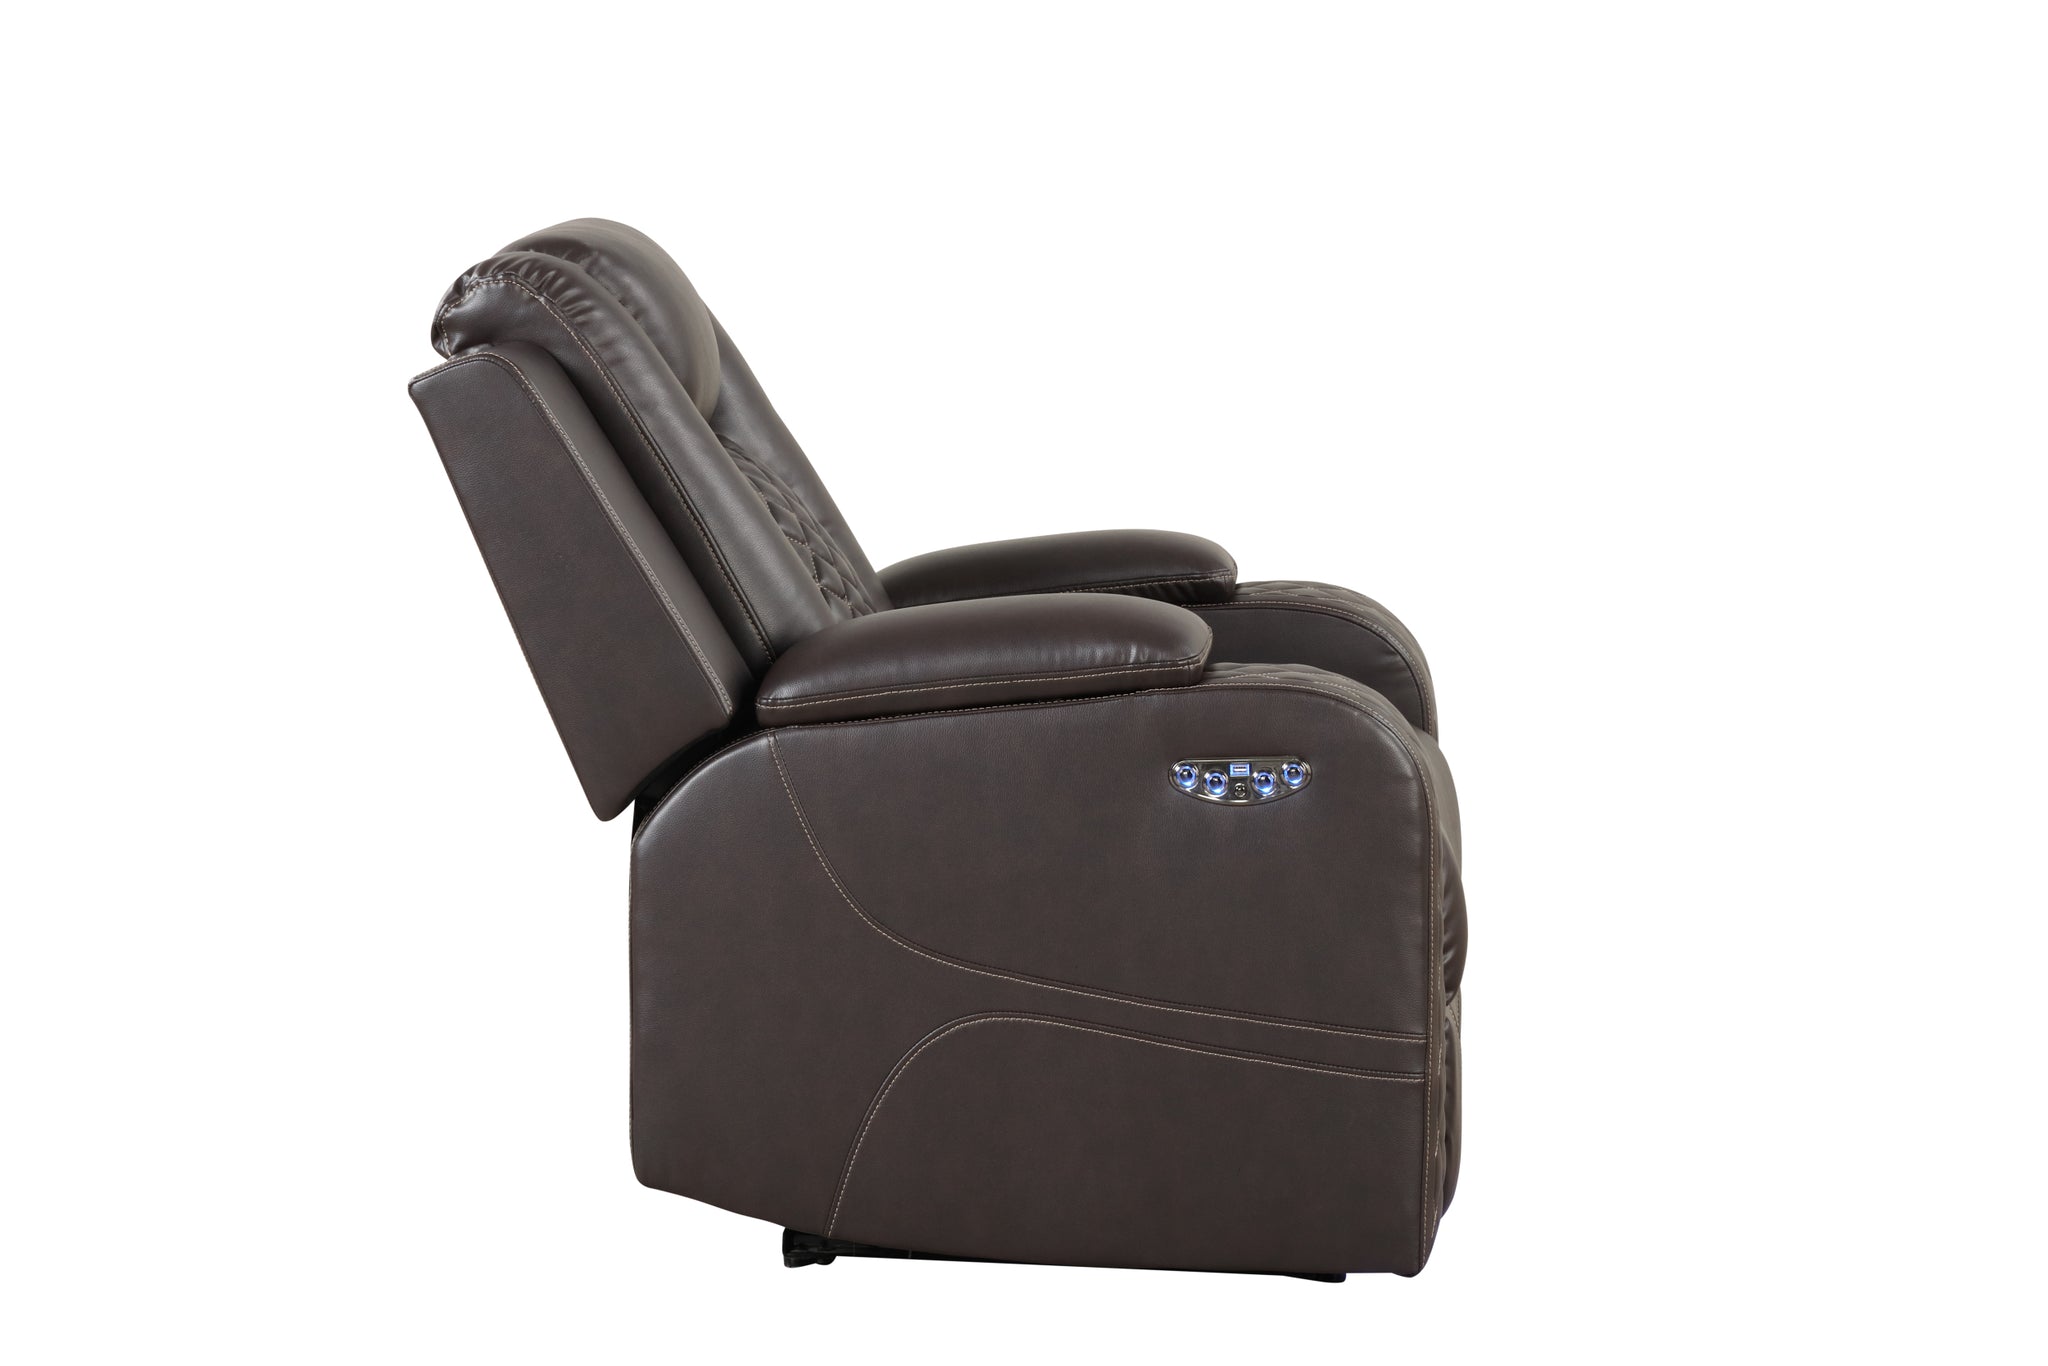 Benz LED & Power Recliner Chair Made With Faux Leather brown-faux leather-power-push button-wood-primary